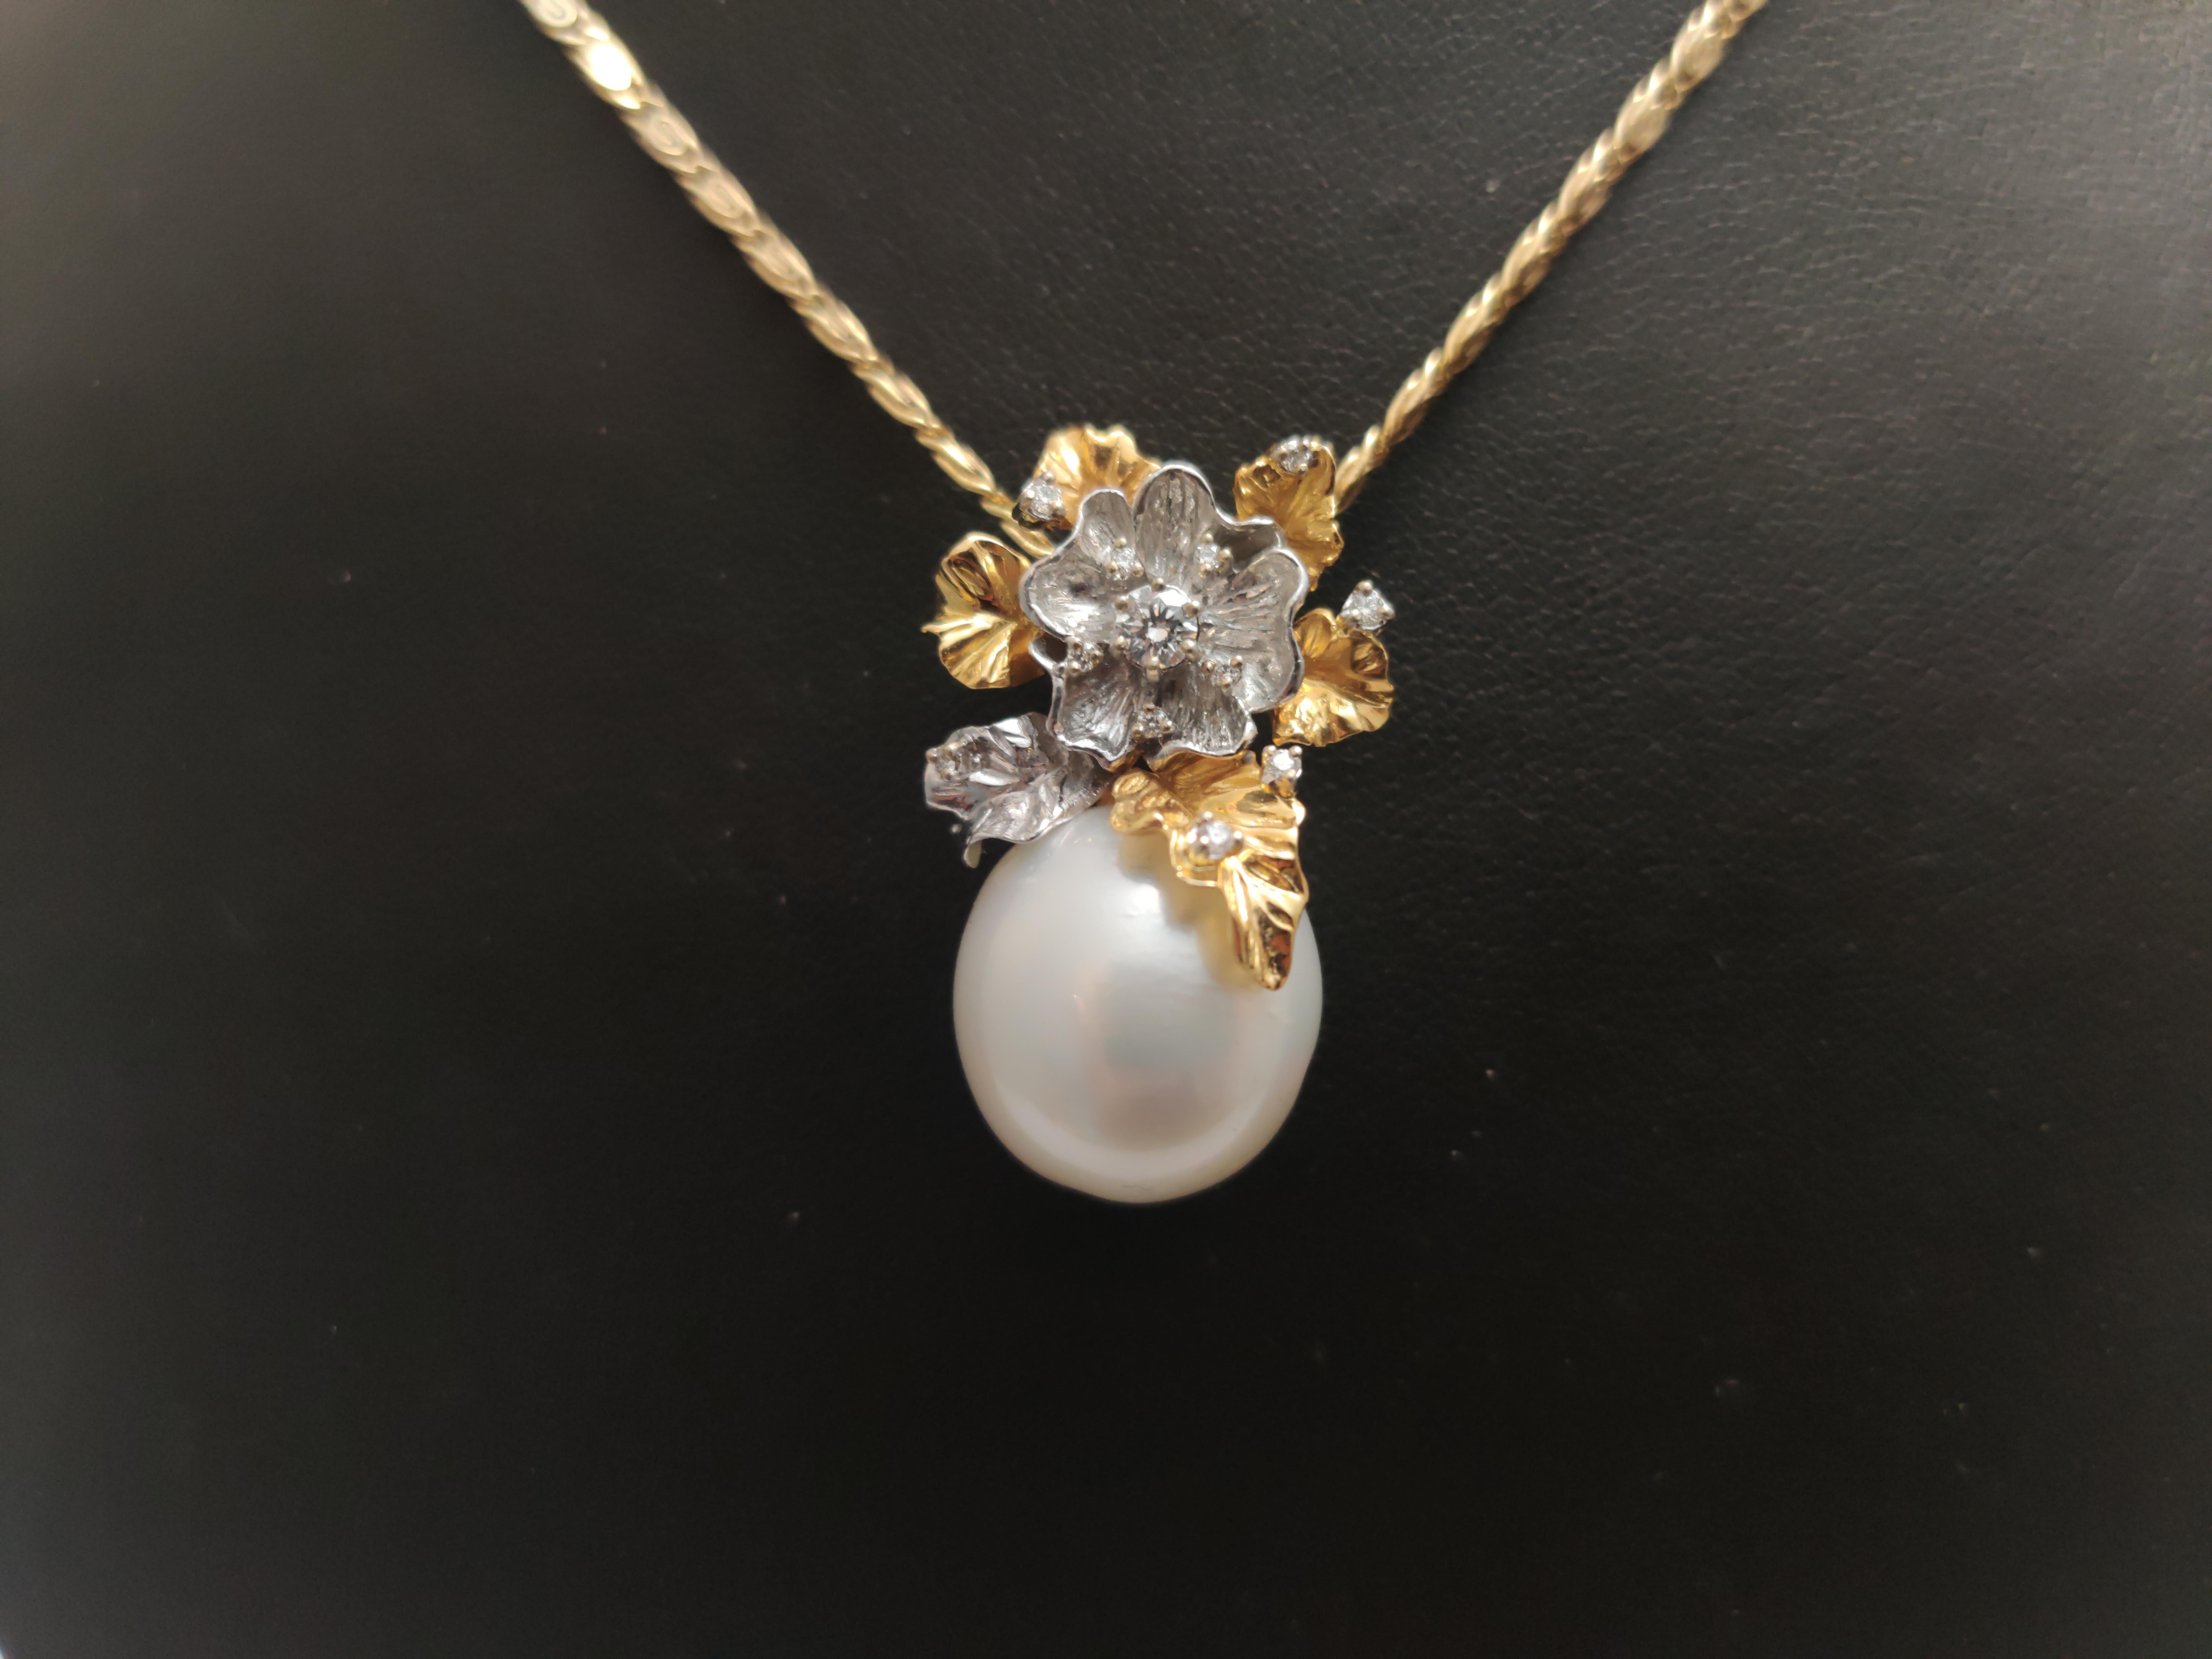 18 k yellow and white gold
1 south sea pearl 14 mm
0,21 ct diamond
length 30 mm
wide 20 mm
weight 11,8 gram
